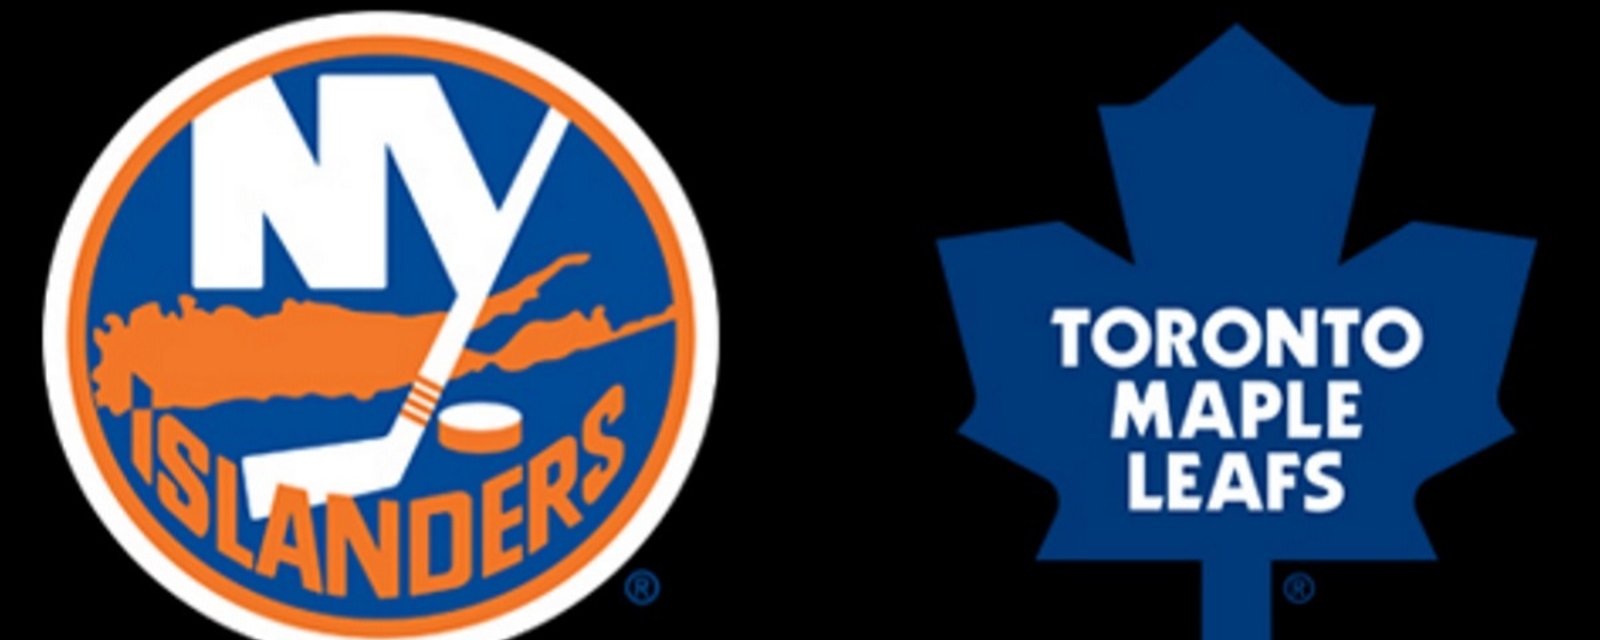 Early rumors of a potential deal between the Islanders and Leafs.